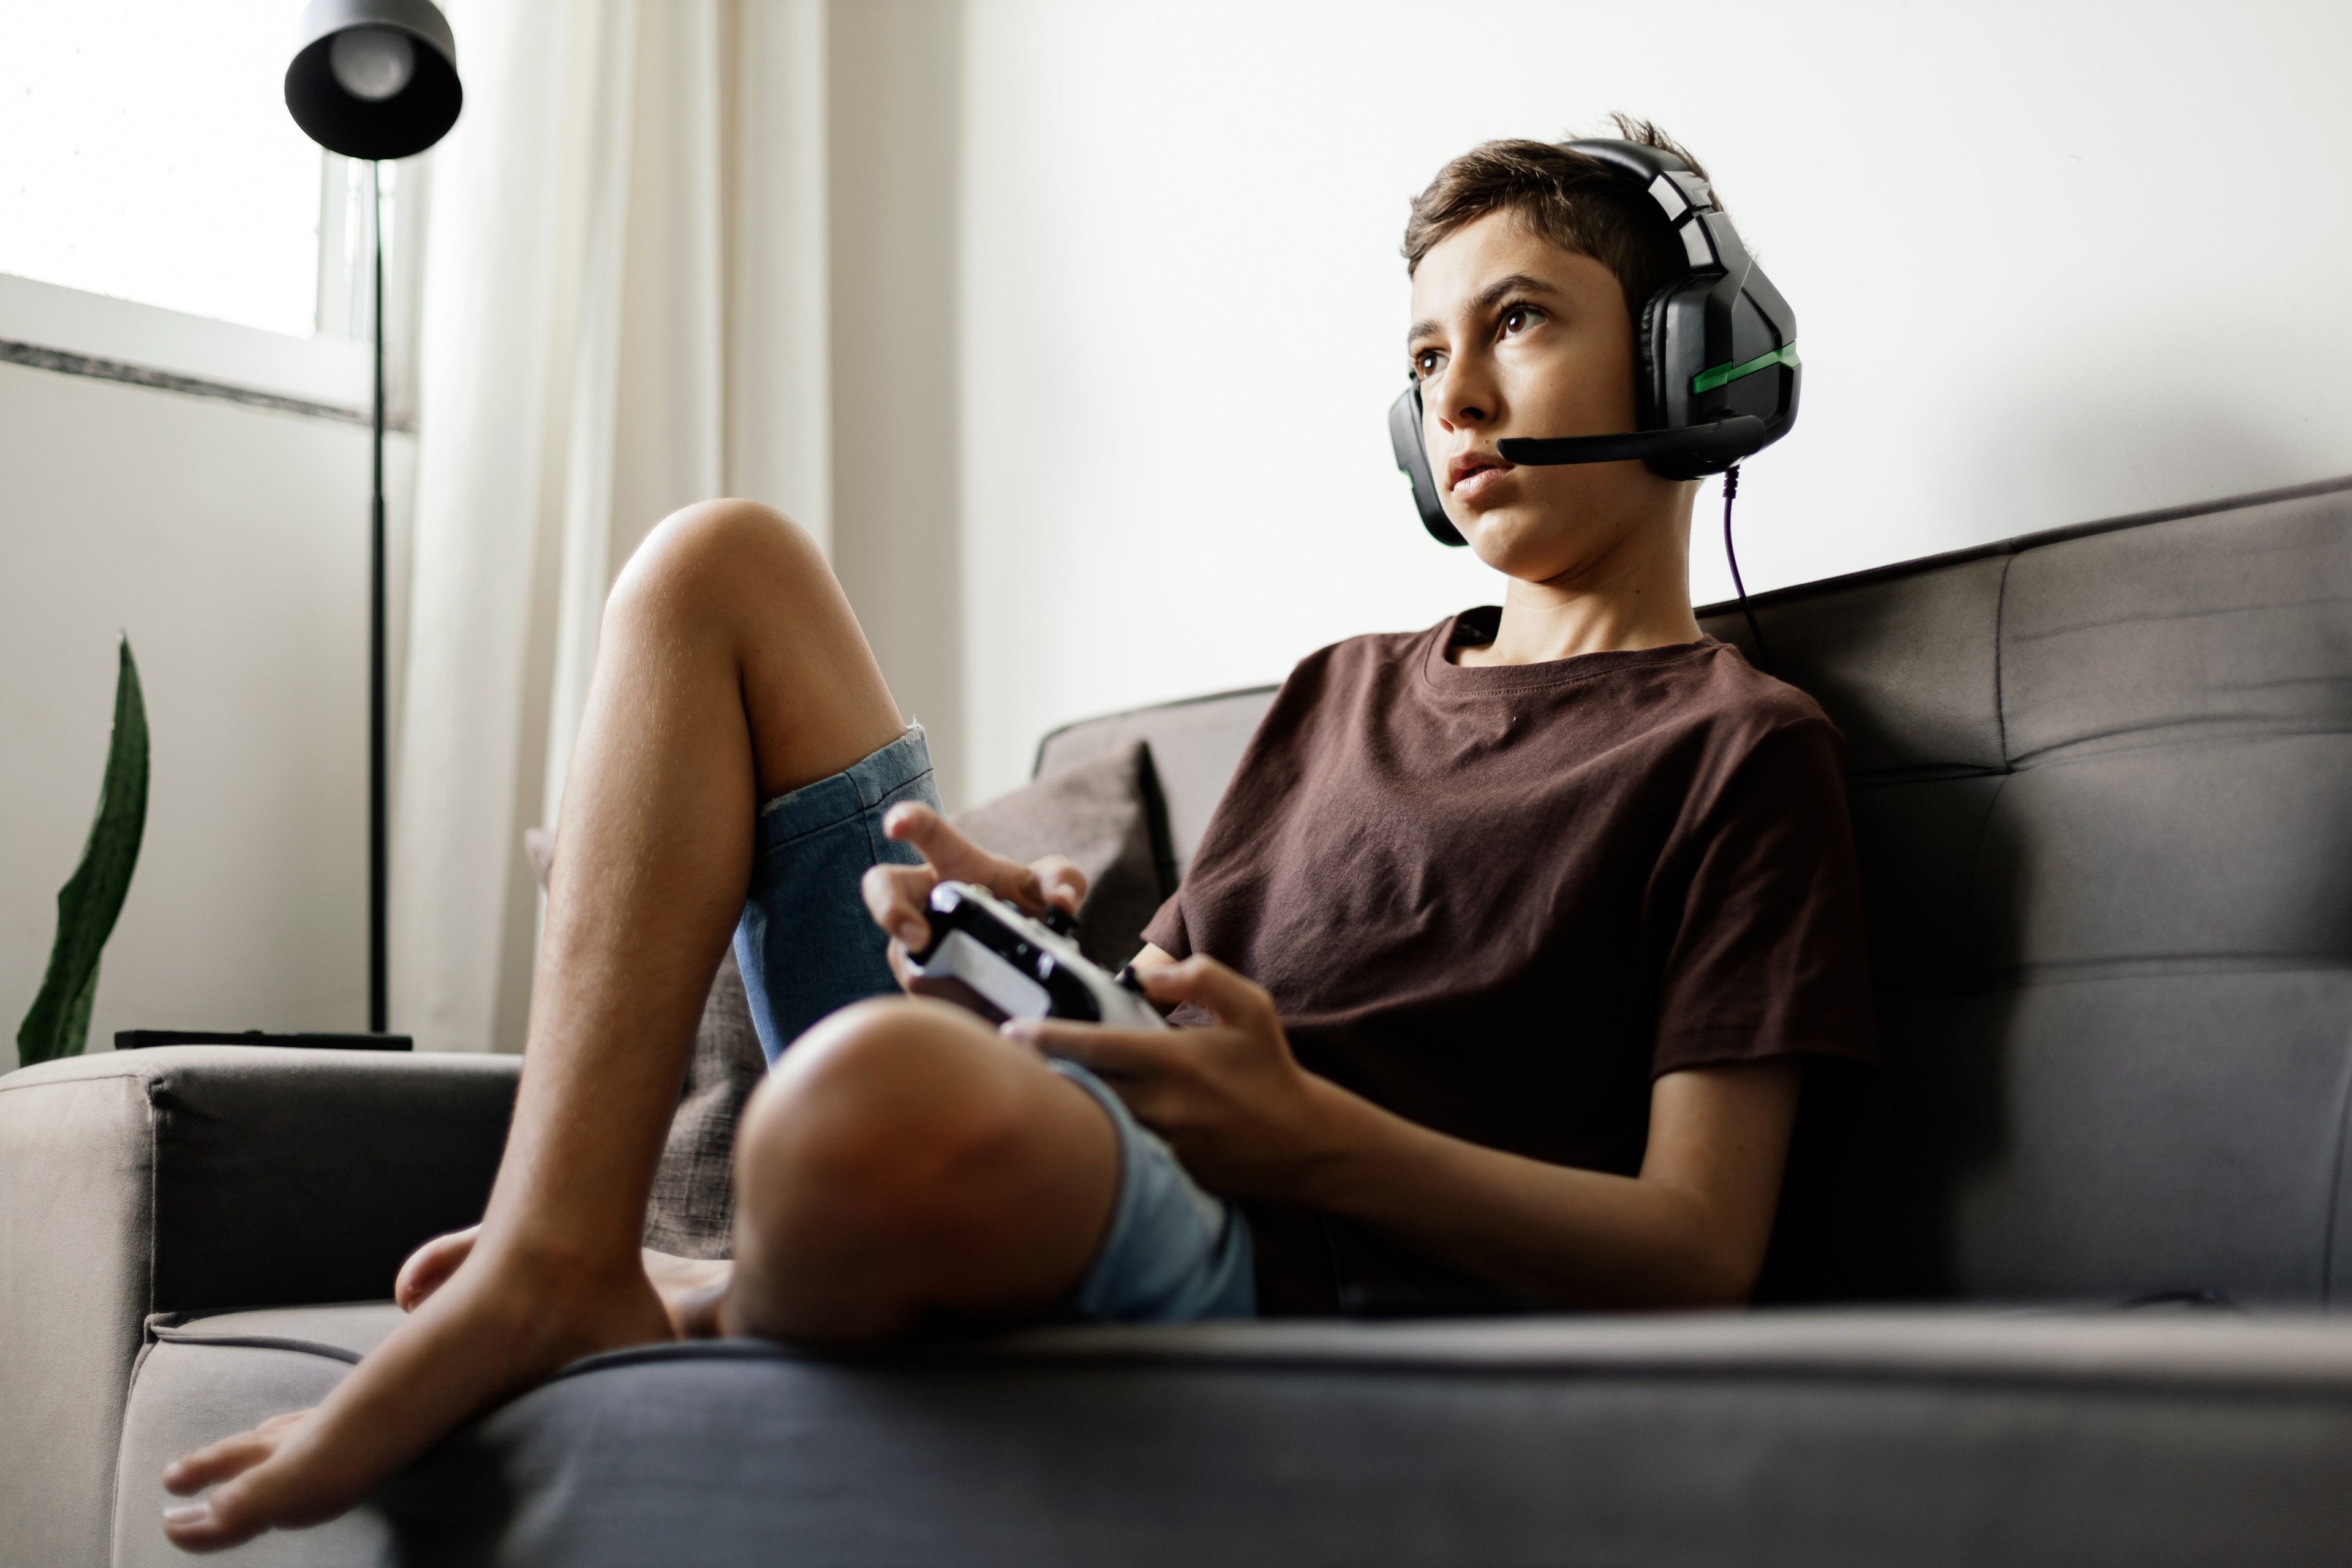 A teenager wearing a headset sits on the couch while playing a video game.